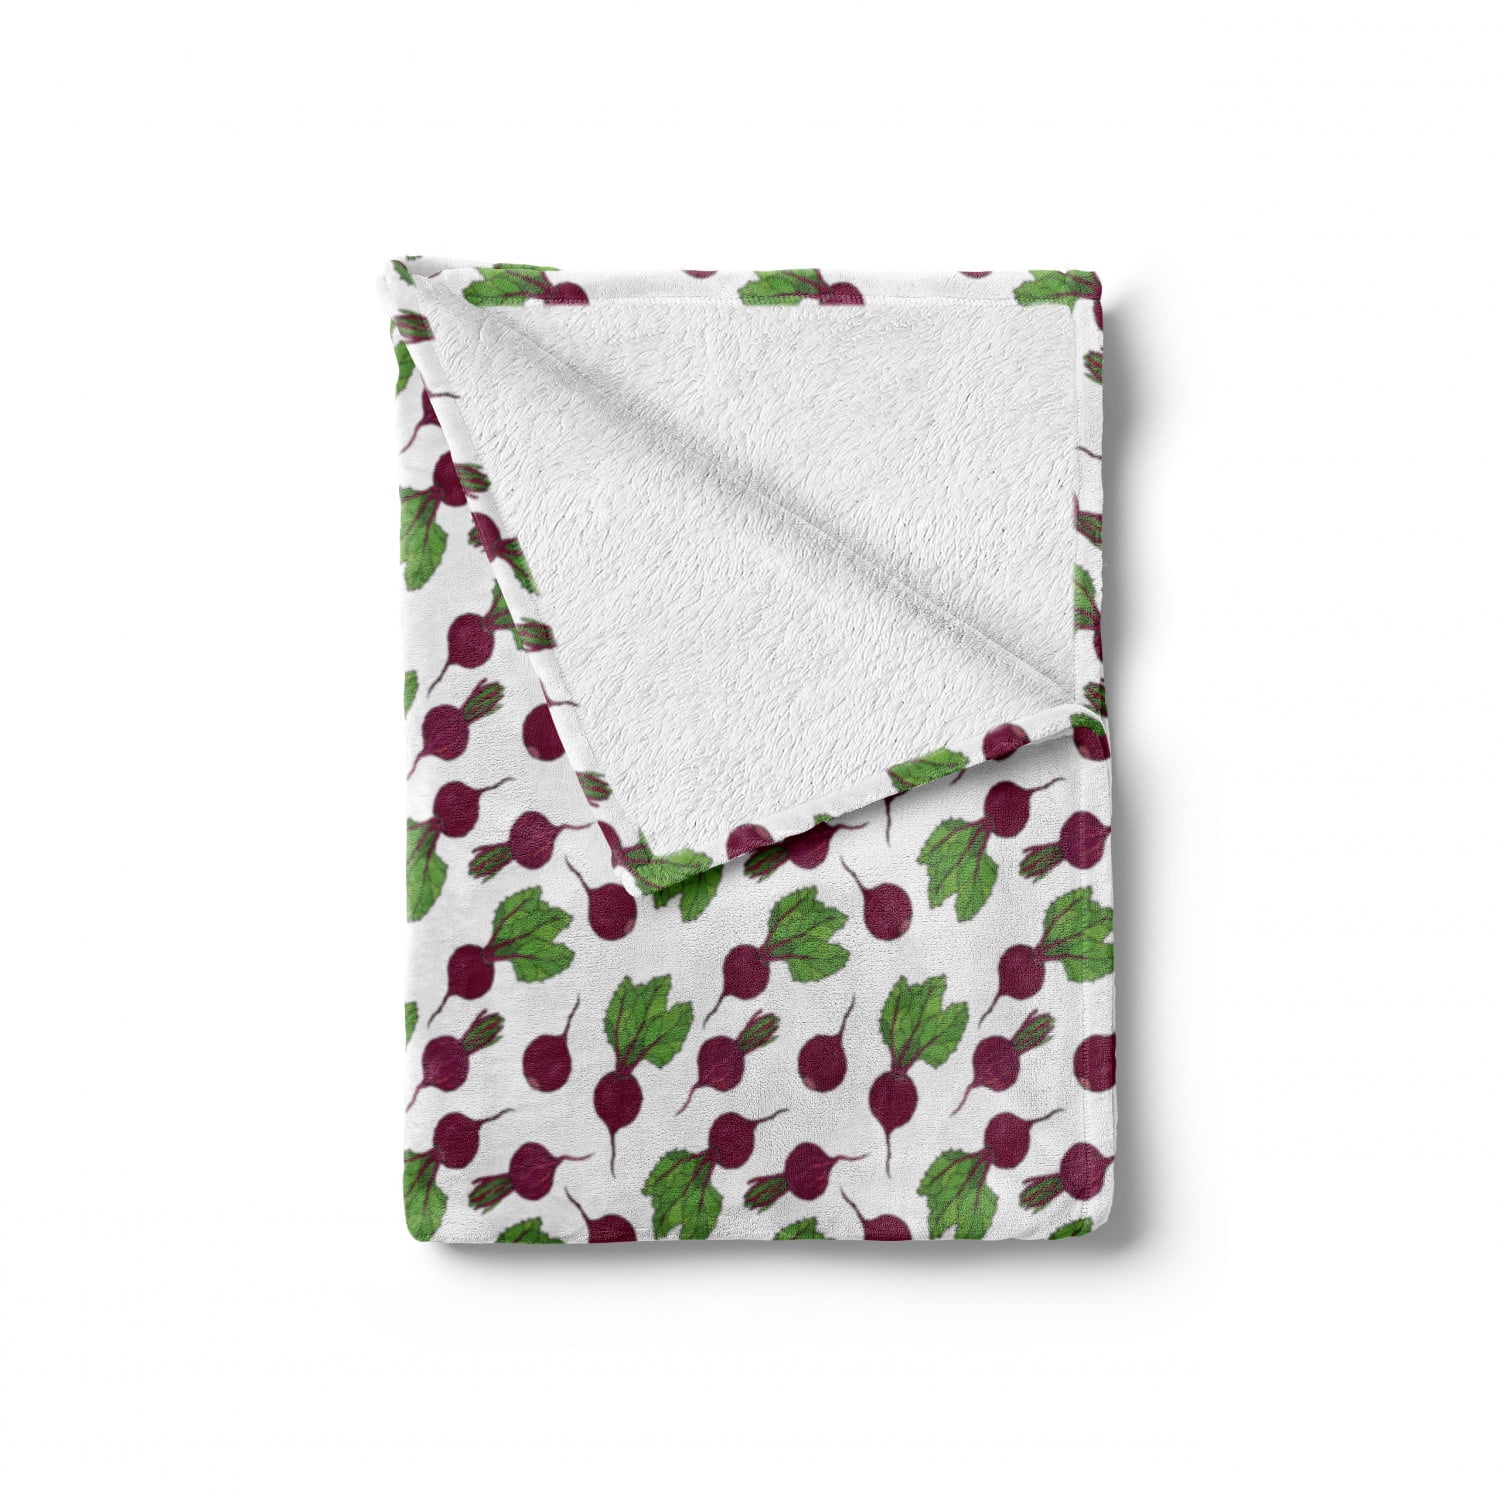 60 x 80 Cozy Plush for Indoor and Outdoor Use Ambesonne Vegetable Soft Flannel Fleece Throw Blanket Green Plum White Cartoon Style Whole and Halved Beets Pattern Healthy Ingredients Vegetarian 